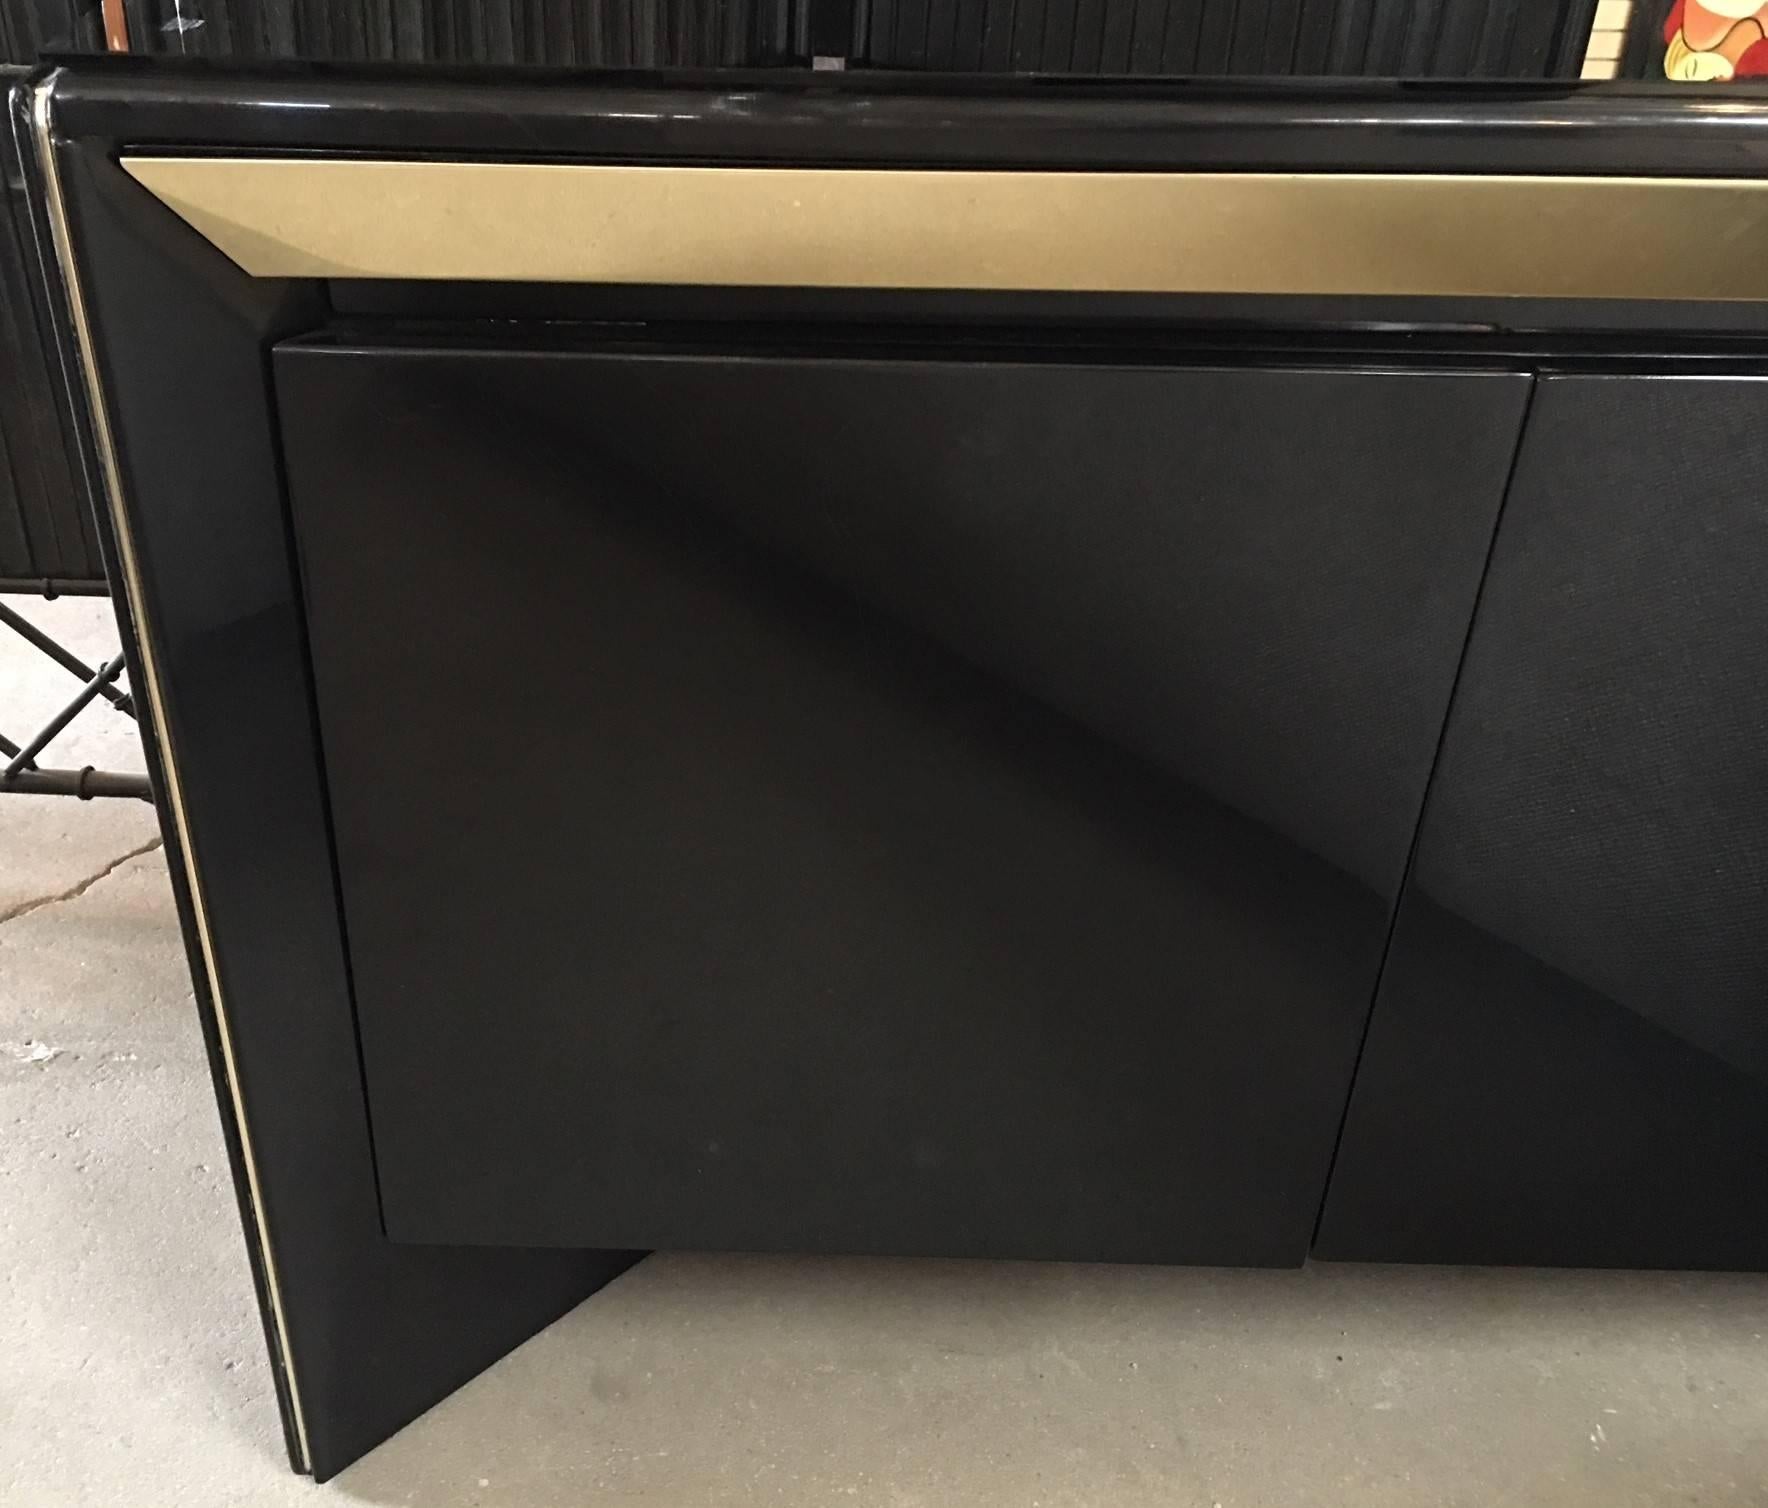 Stunning black lacquer credenza with four push-latch doors and brass trim. The base is recessed and the top has a piece of glass protecting the lacquer.
The original matching table is available. See listing.